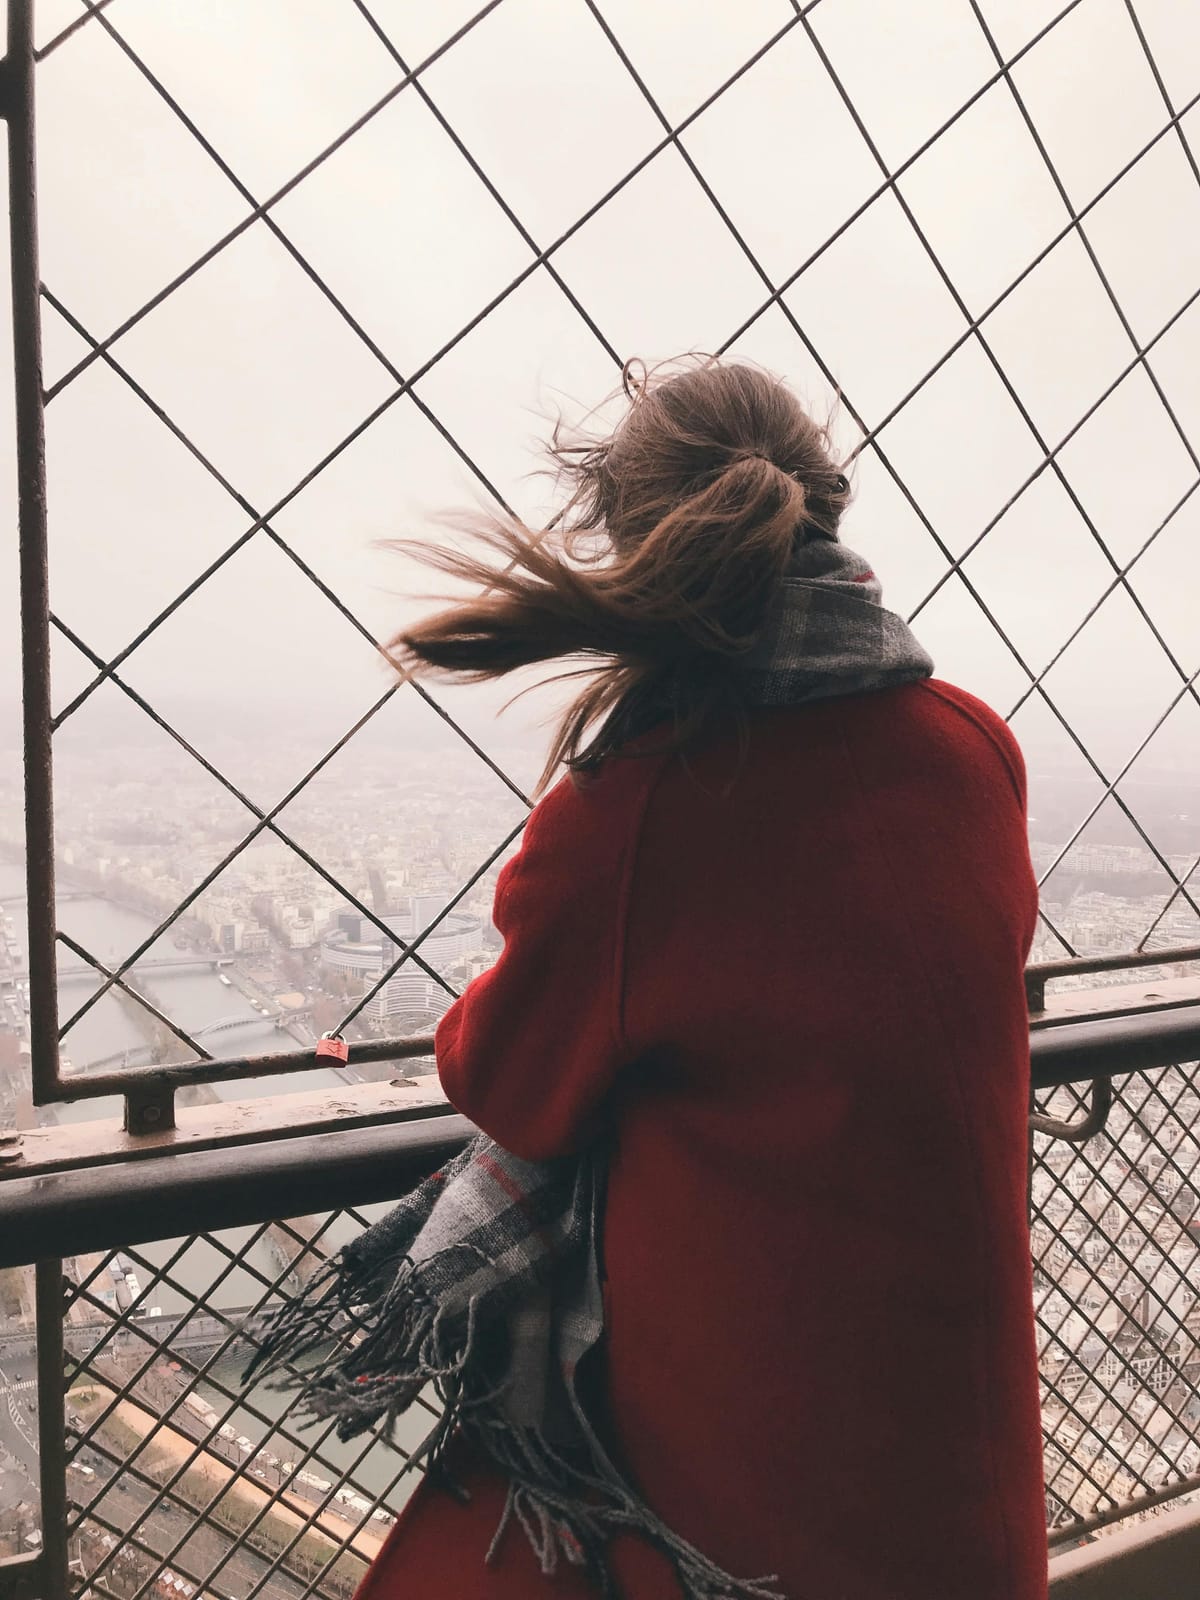 Woman in red coat and plaid scarf looking over a foggy city view through lattice bars as the wind whips her hair.